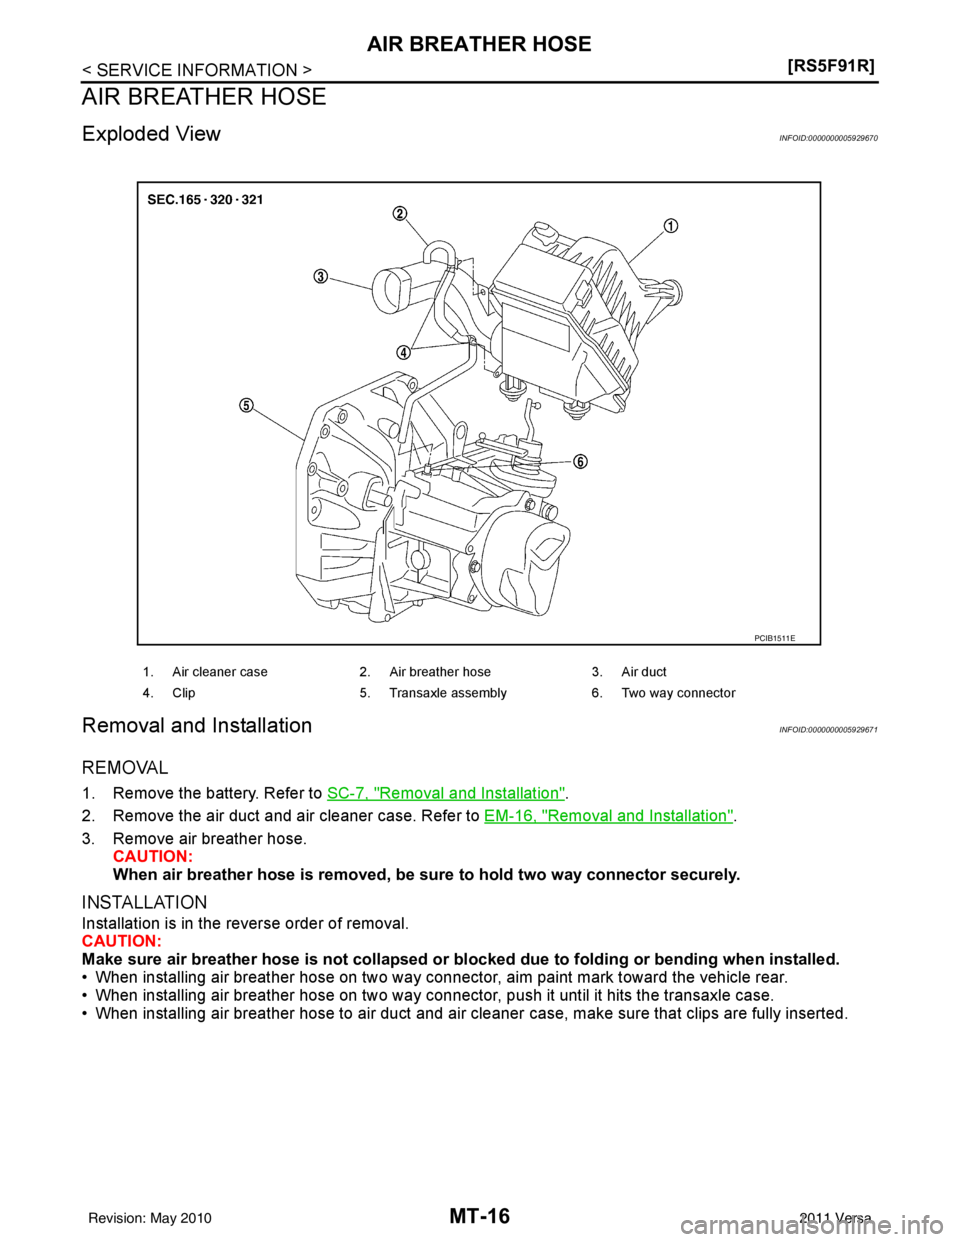 NISSAN LATIO 2011  Service Repair Manual MT-16
< SERVICE INFORMATION >[RS5F91R]
AIR BREATHER HOSE
AIR BREATHER HOSE
Exploded ViewINFOID:0000000005929670
Removal and InstallationINFOID:0000000005929671
REMOVAL
1. Remove the battery. Refer to 